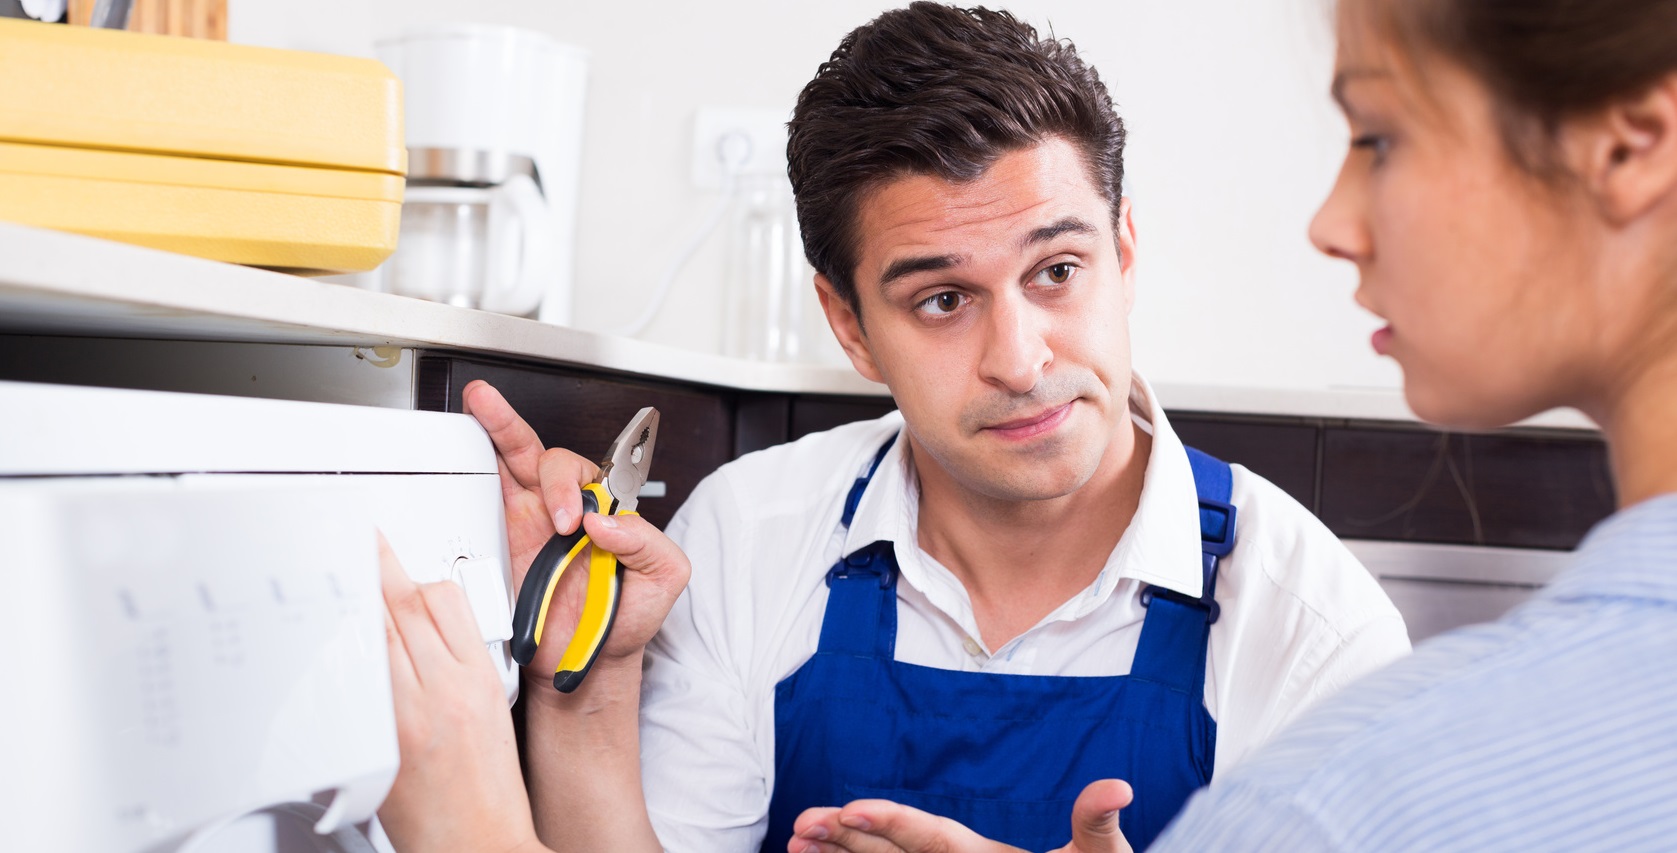 Serious serviceman and stressed woman near washing machine in kitchen